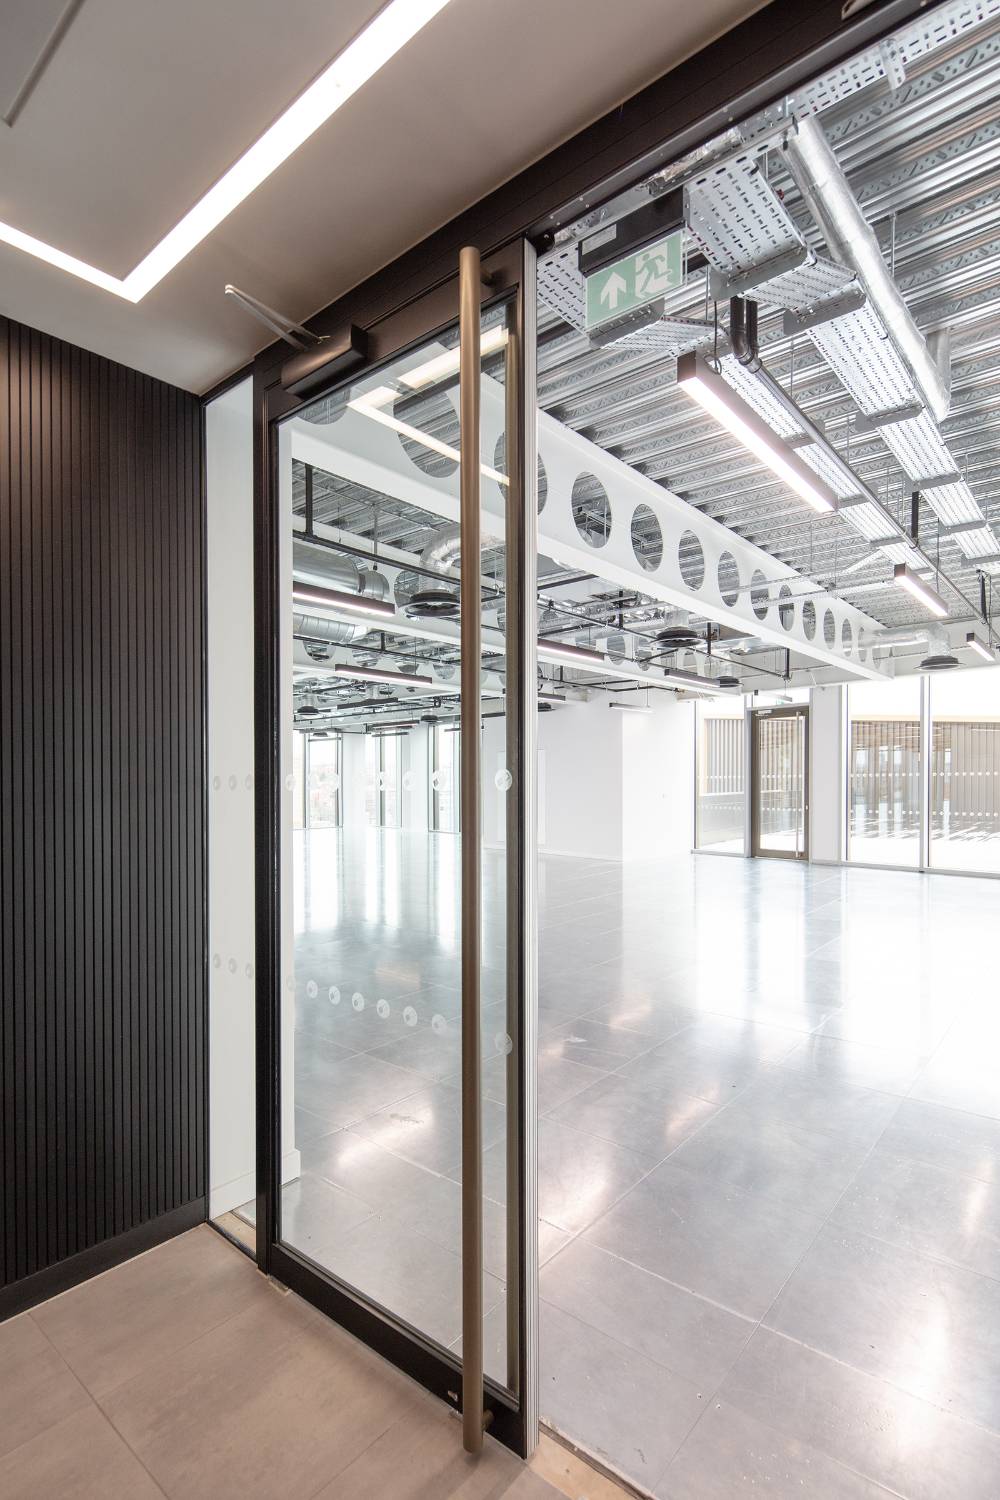 FireTec Ei60 Single Glazed Fire Rated Partition System (Micro Channel) and Doorset